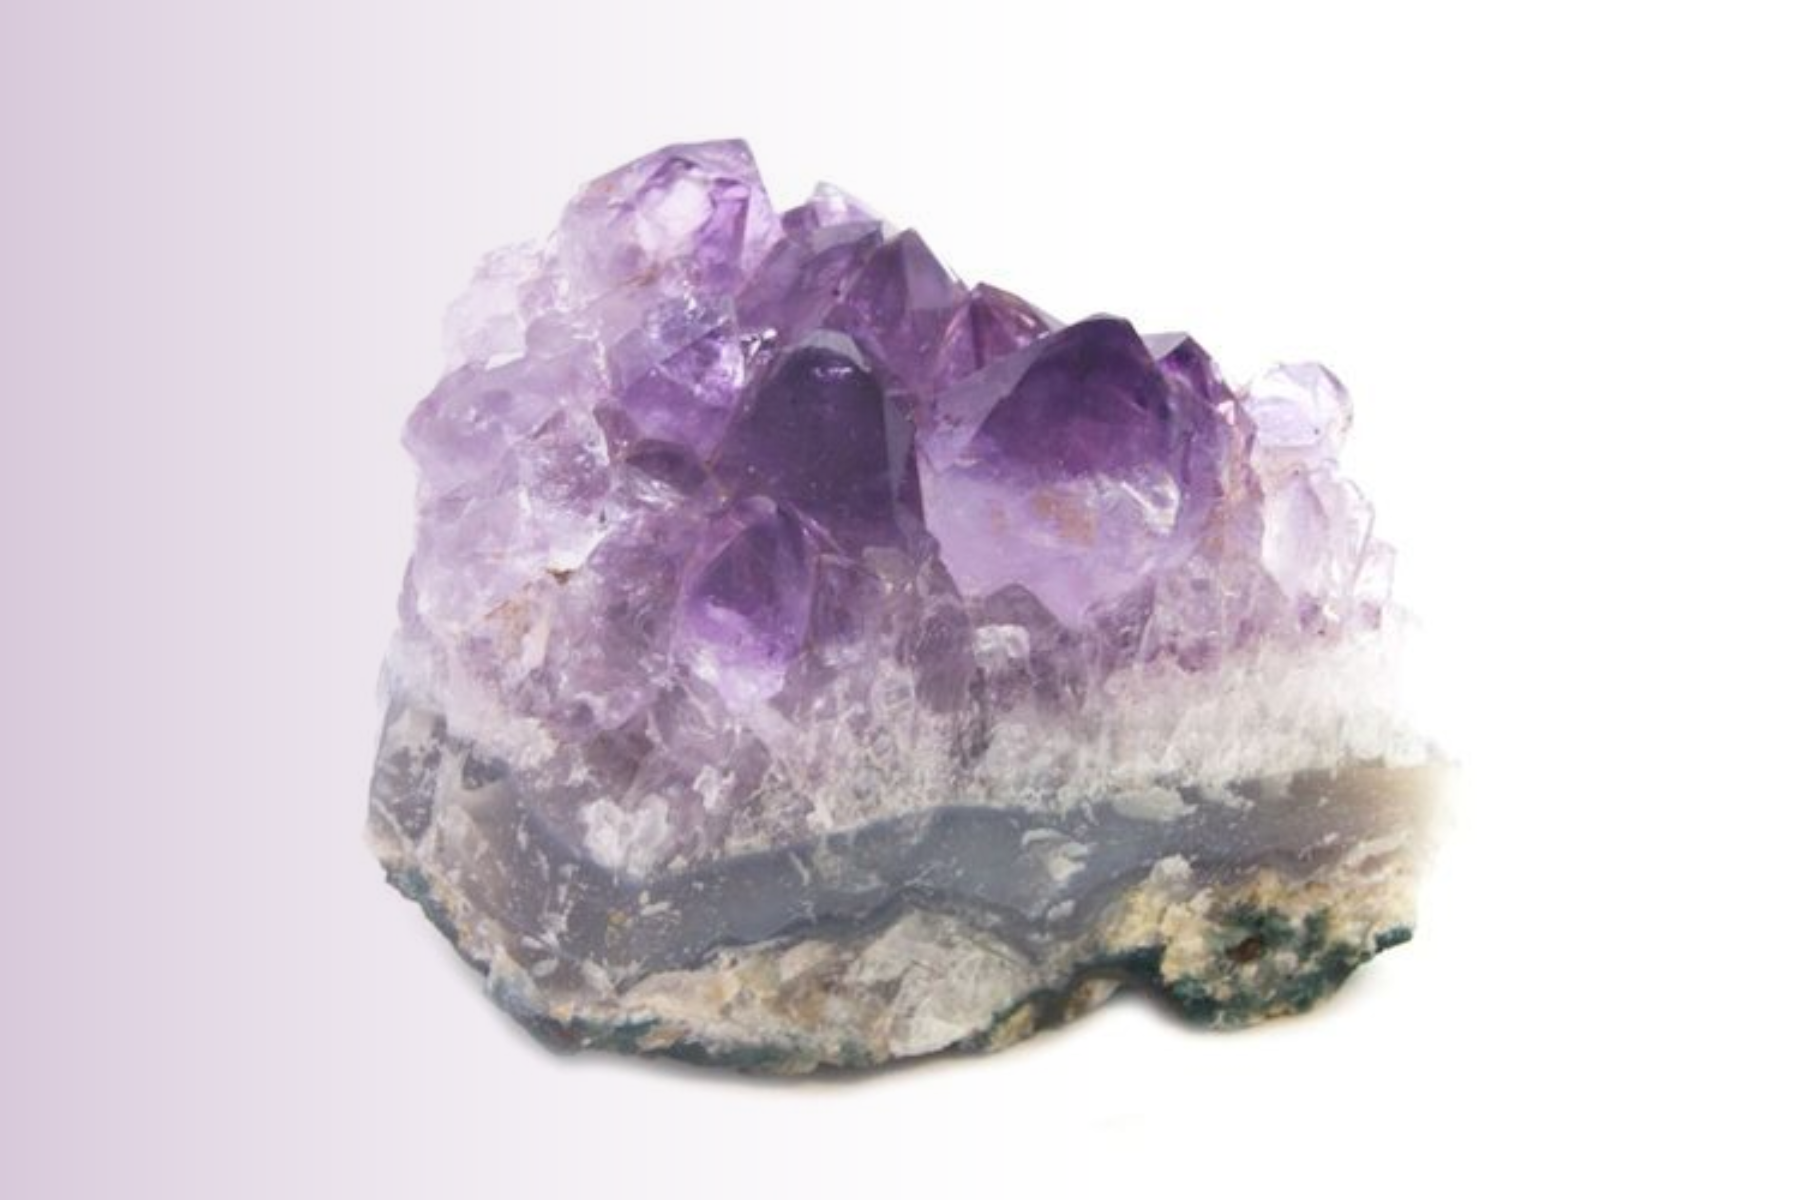 Amethyst crystal that is still connected to its host rock